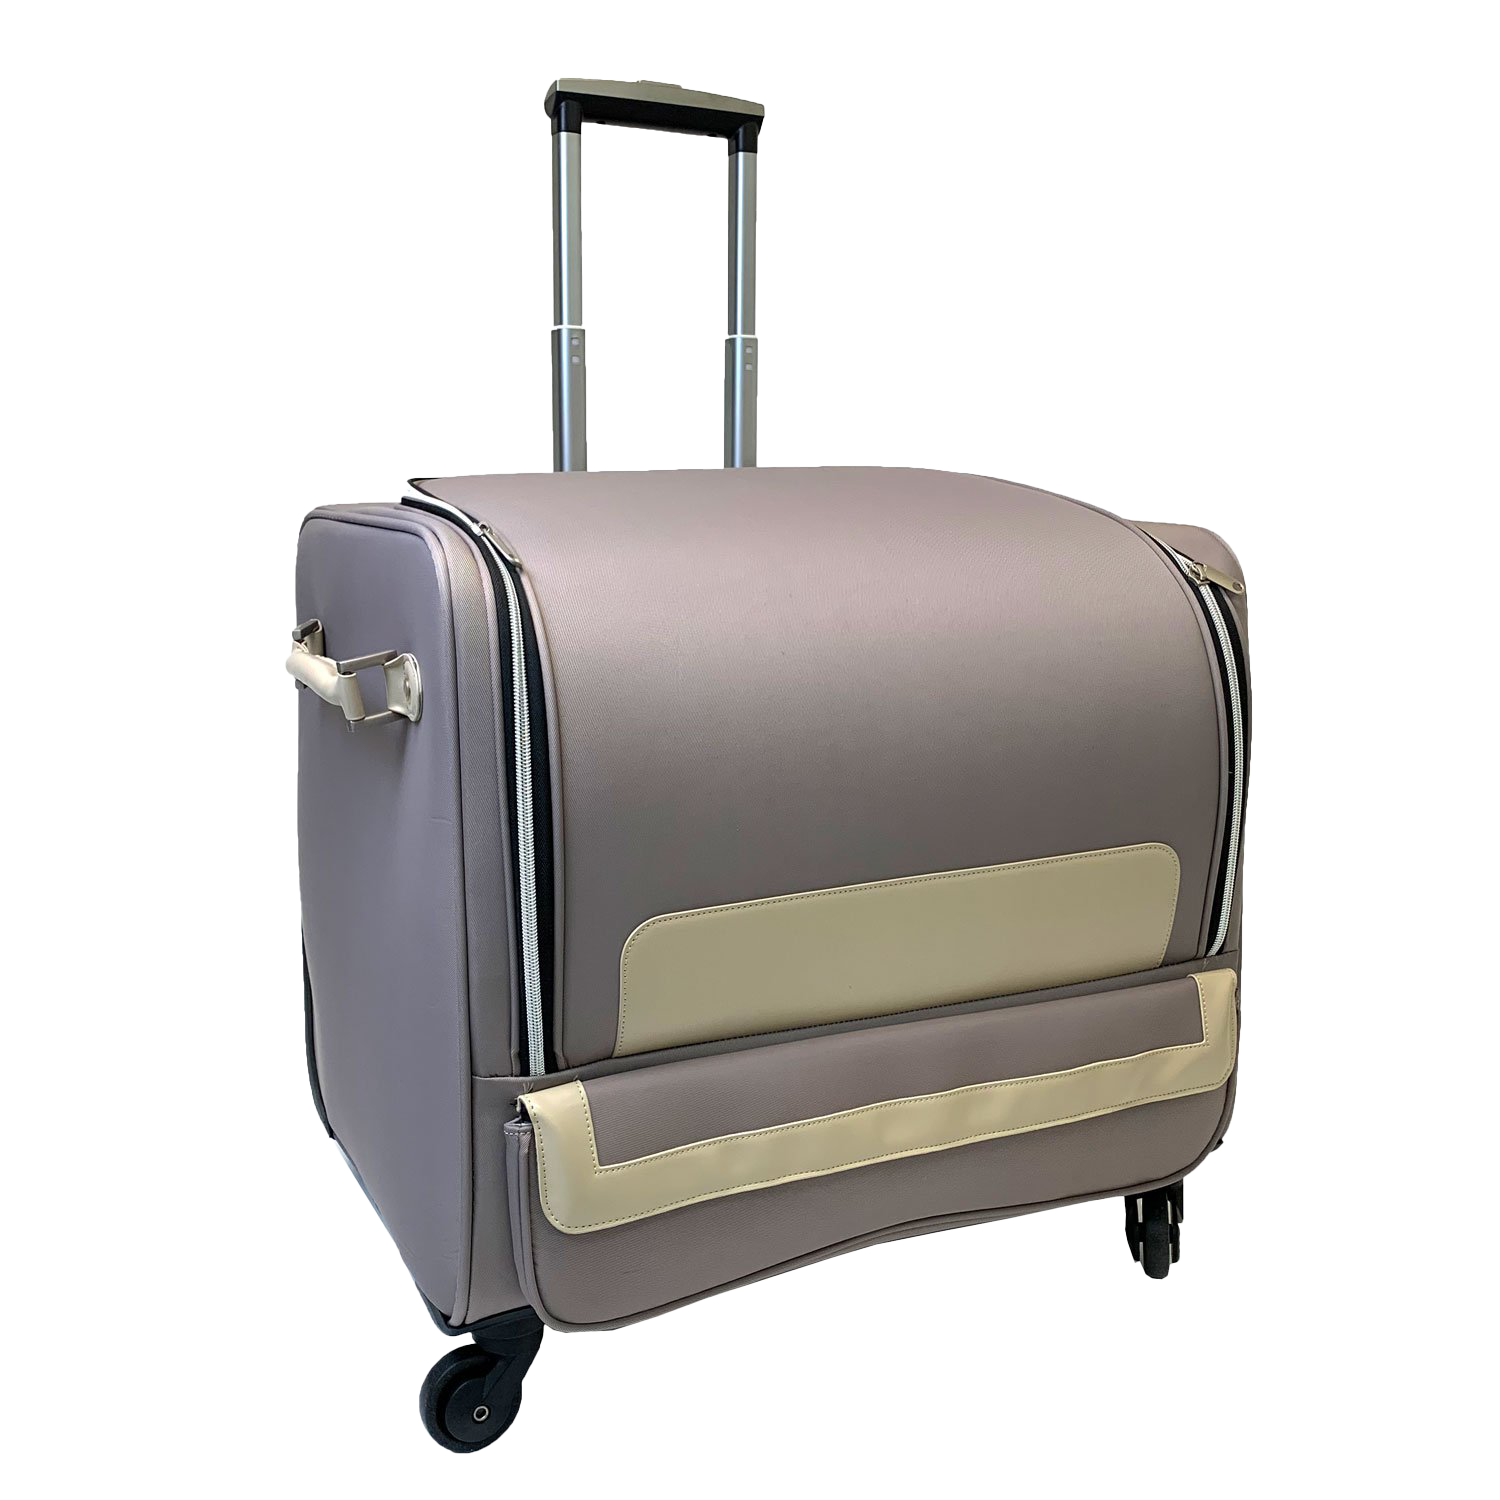 Shop the largest selection of genuine Husqvarna Viking Luggage and Totes online at World Weidner